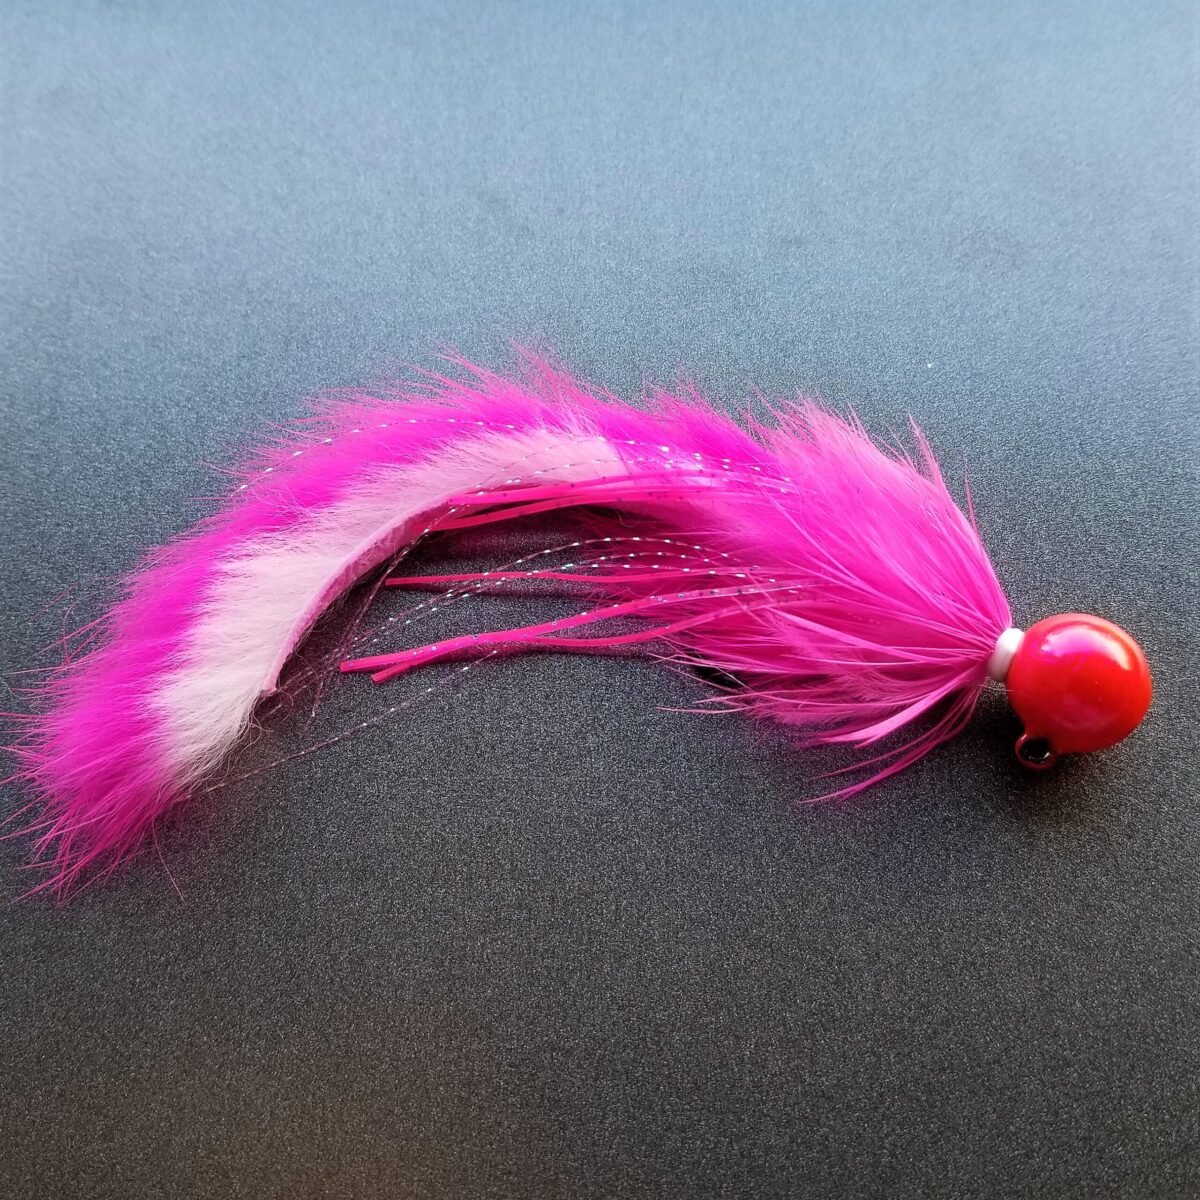 Dinger Jigs Twitching Jigs Cupcake scaled 1200x1200 - Twitching Jigs